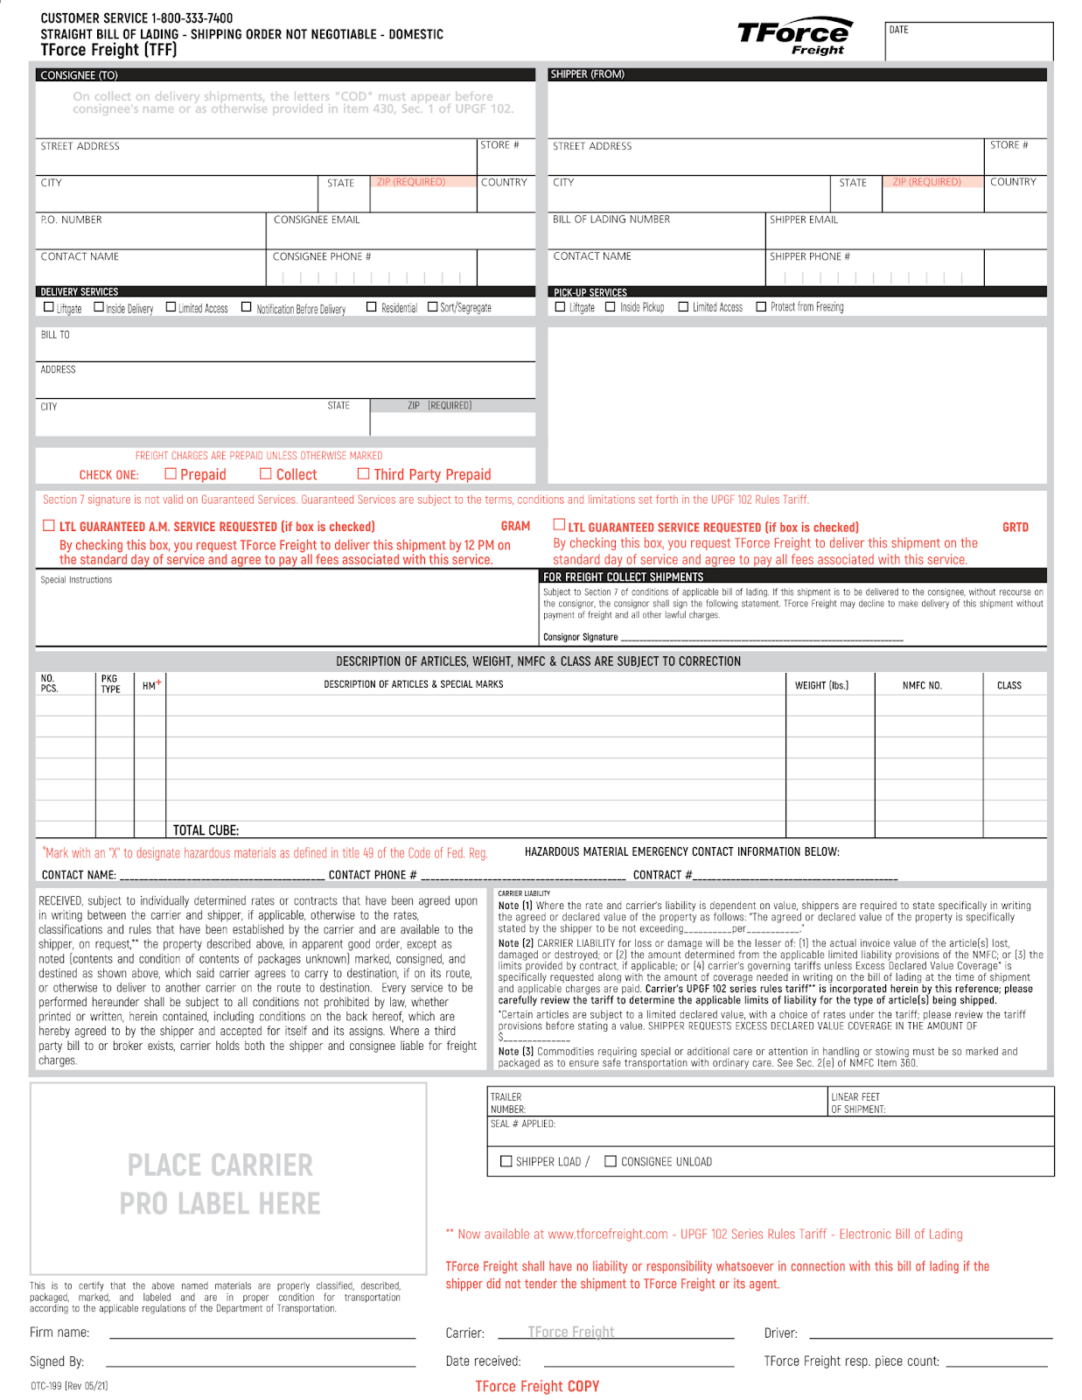 Bill of Lading Form Template by TForceFreight 